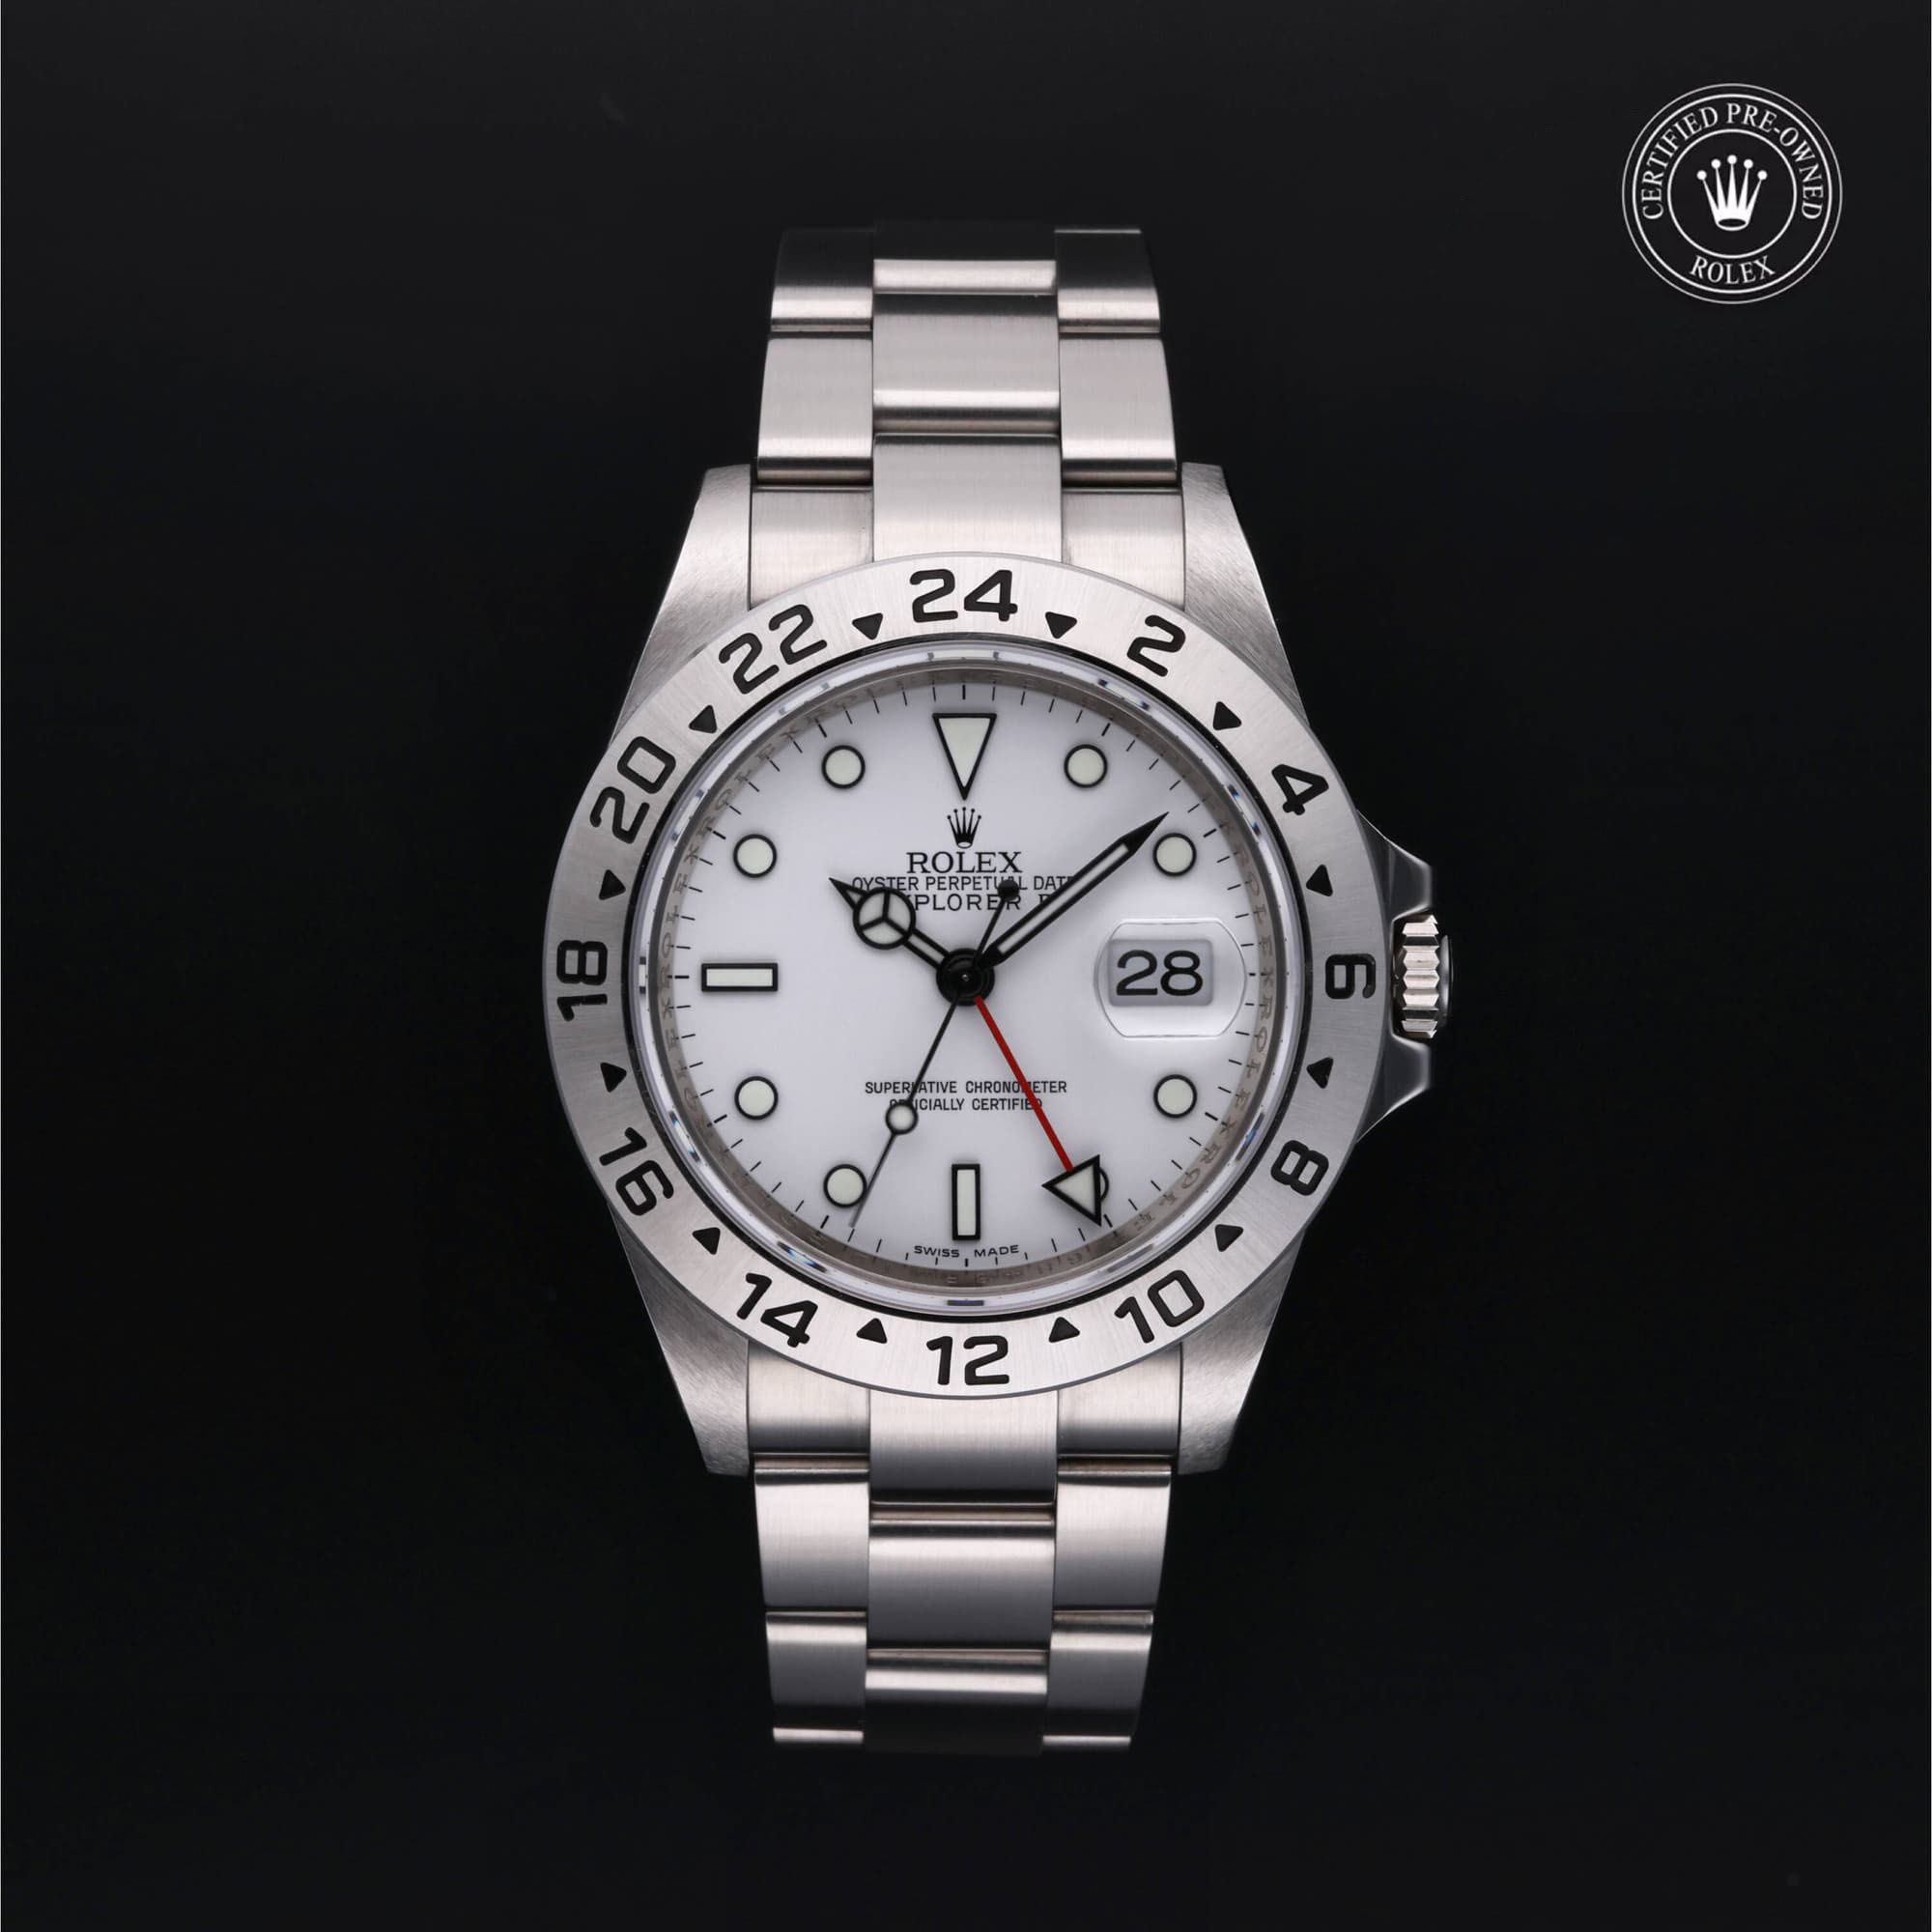 Rolex Certified Pre-Owned M16570-0006